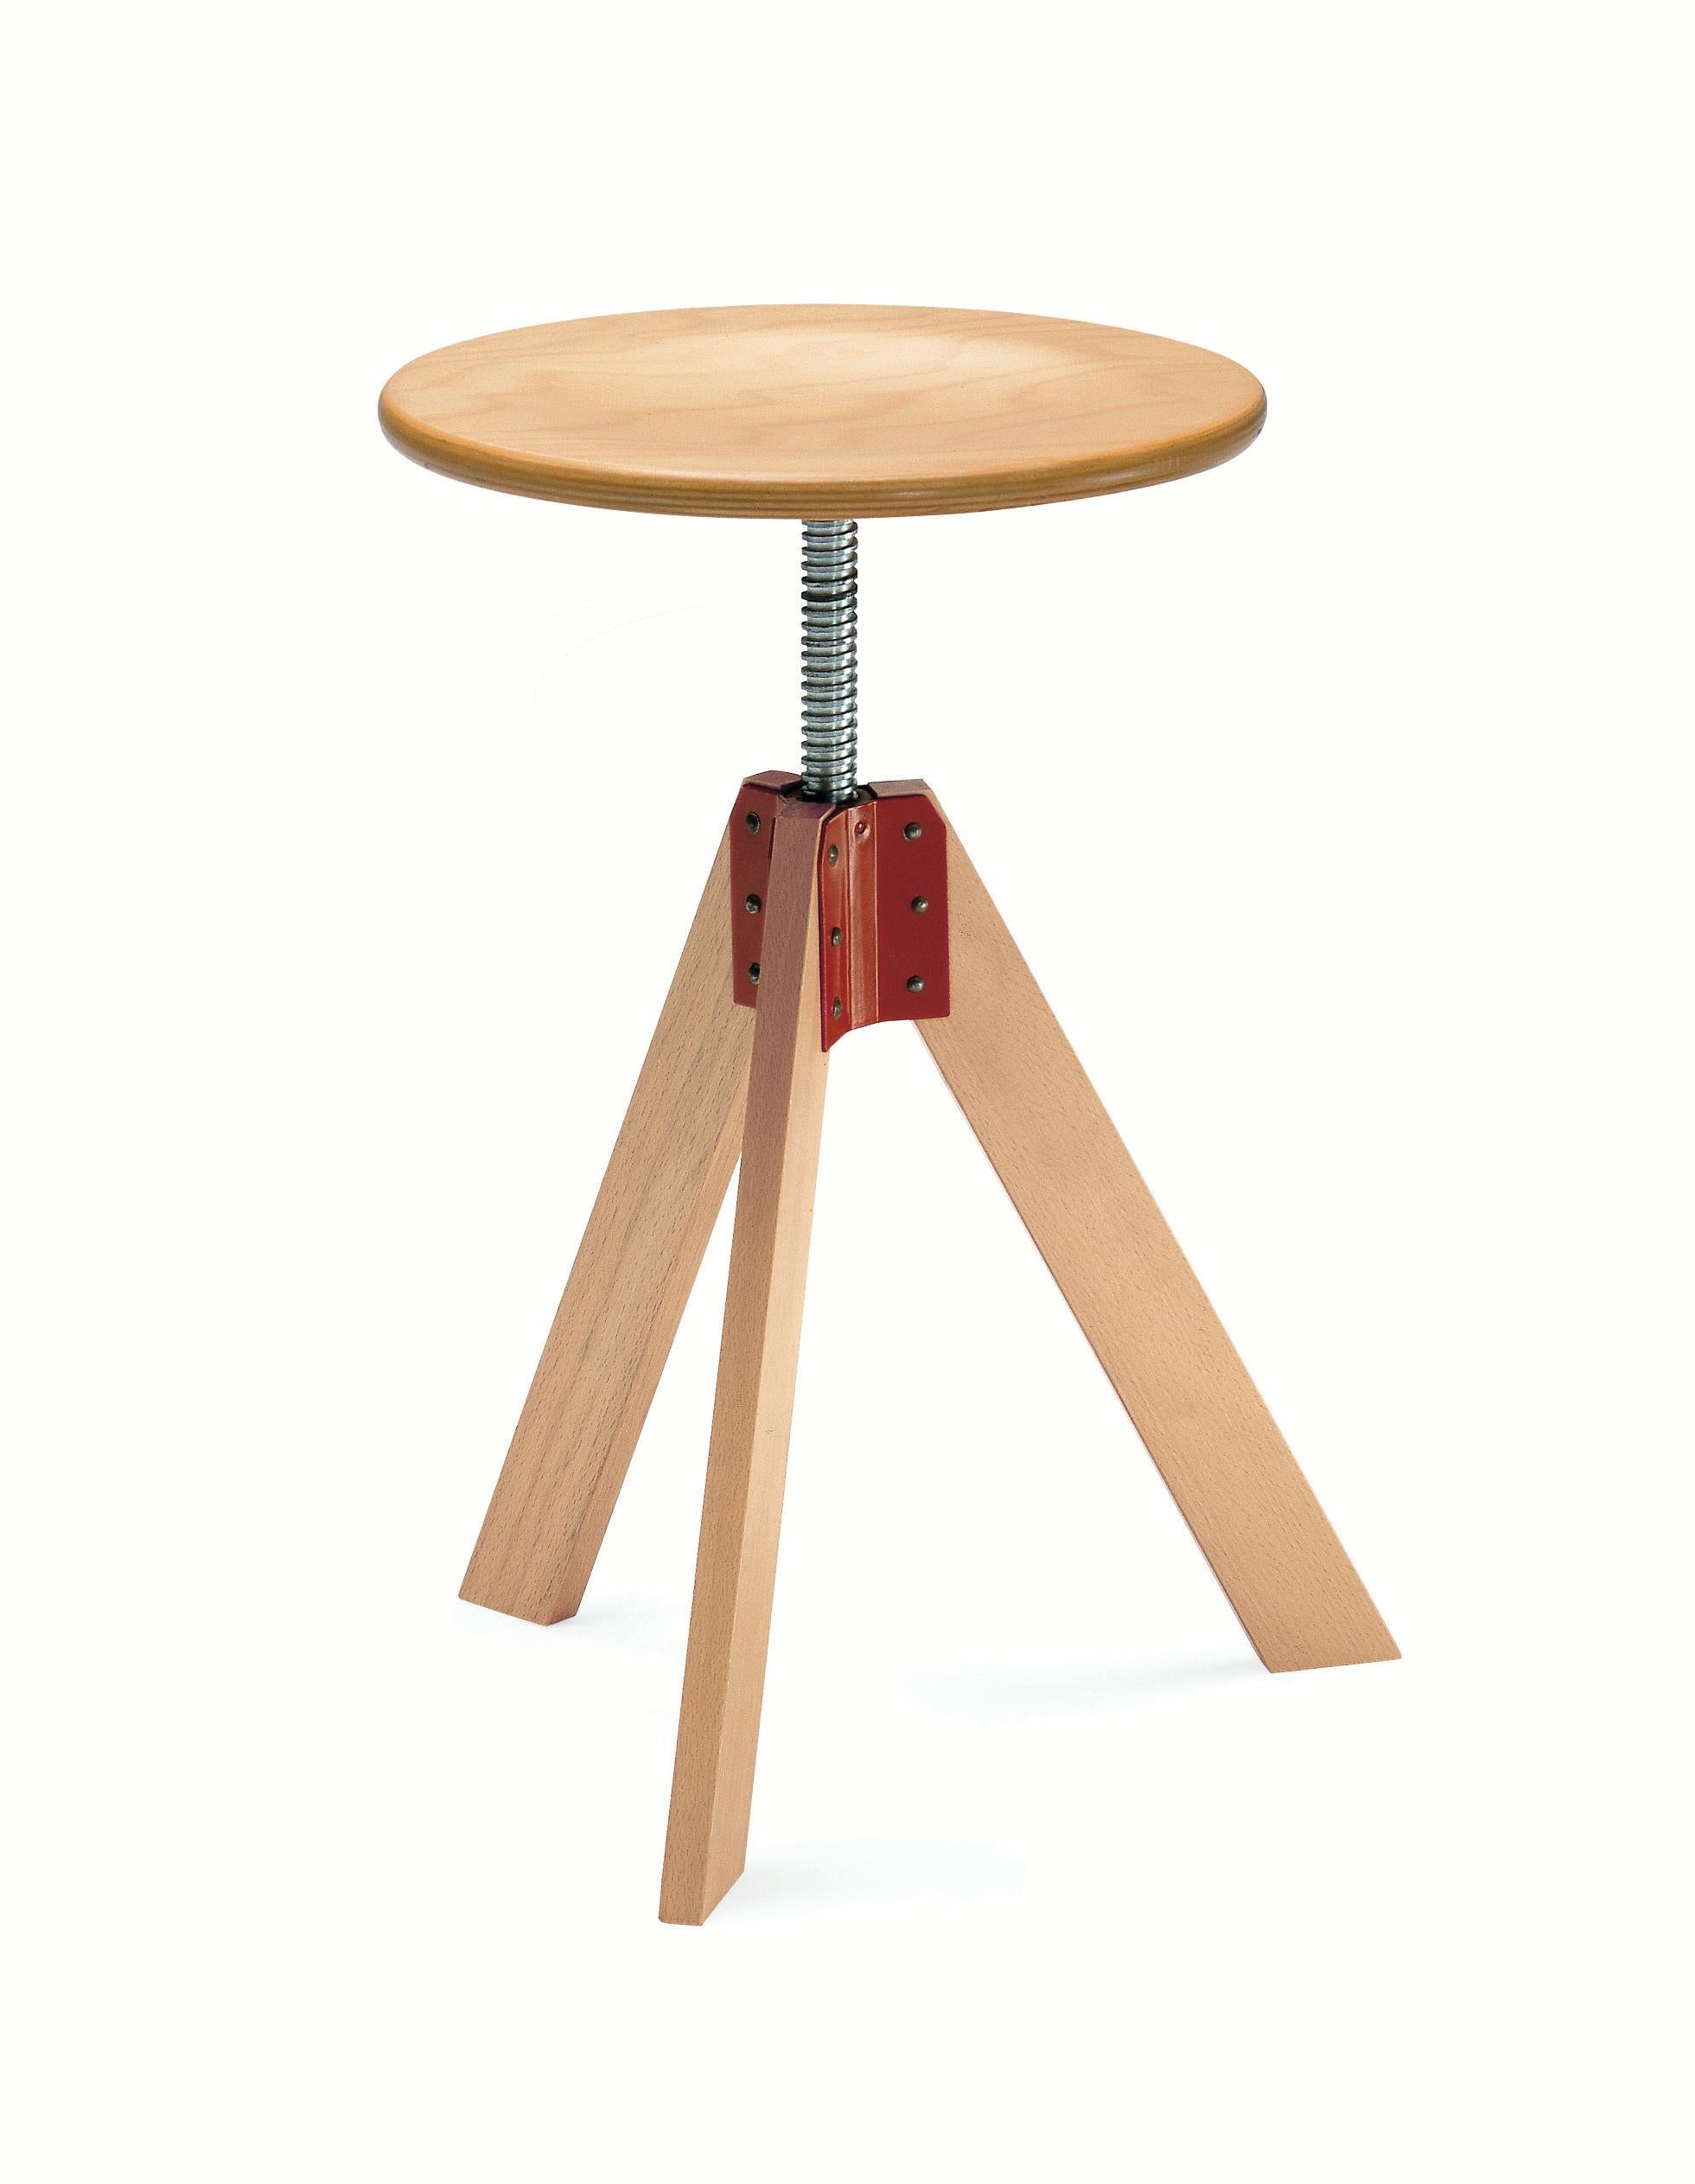 Zanotta Giotto Stool in Natural Varnished Beech Frame with Red Bracket by De Pas, D’Urbino, Lomazzi

Natural varnished beech frame with red bracket. Vertically adjustable revolving seat.

Additional Information:
Material: Beech
Frame finish: